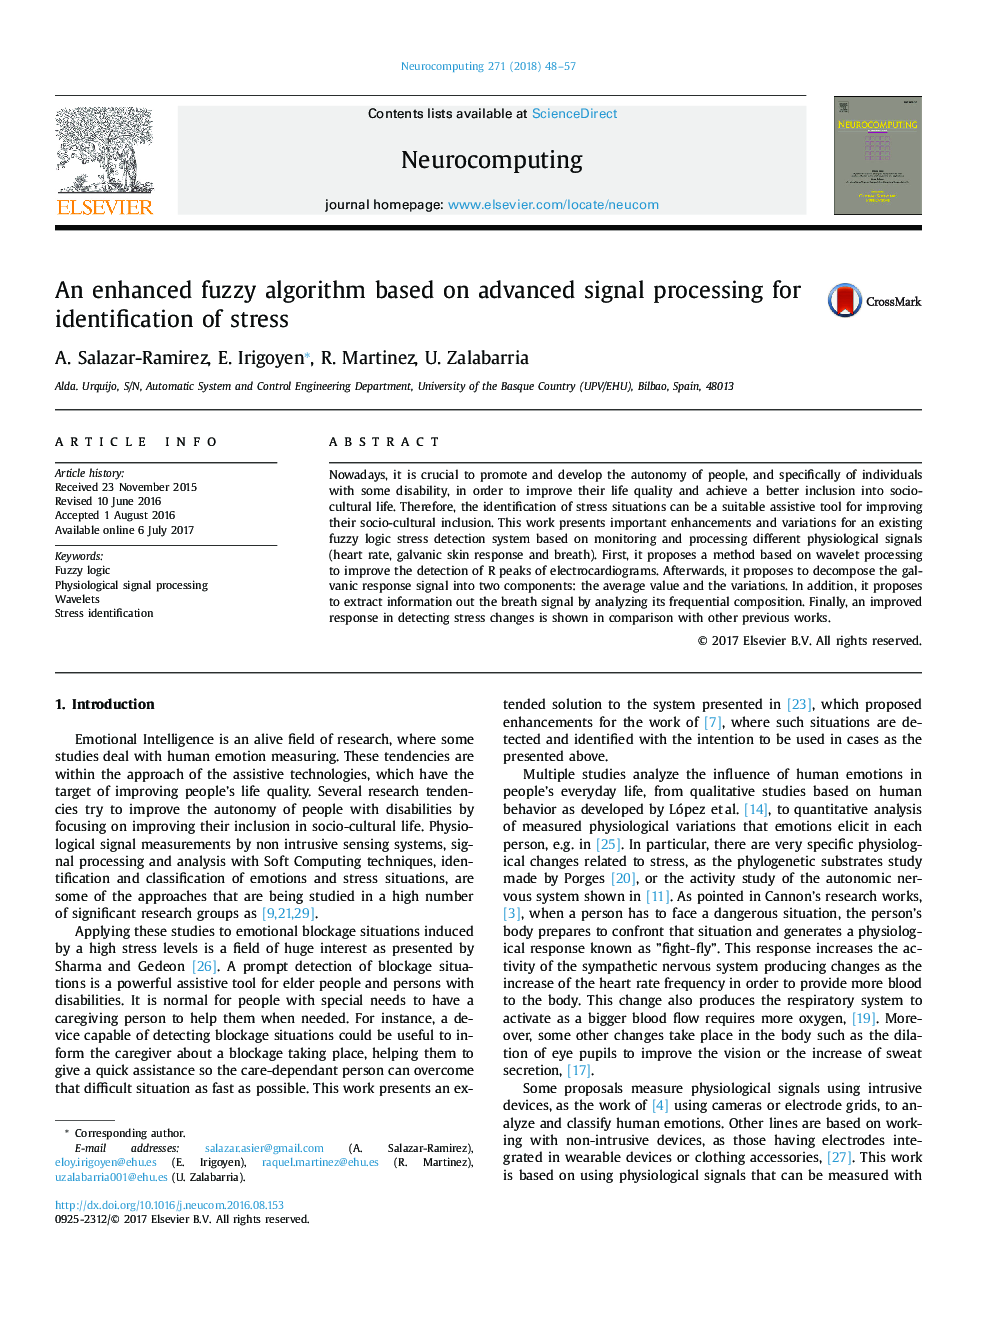 An enhanced fuzzy algorithm based on advanced signal processing for identification of stress